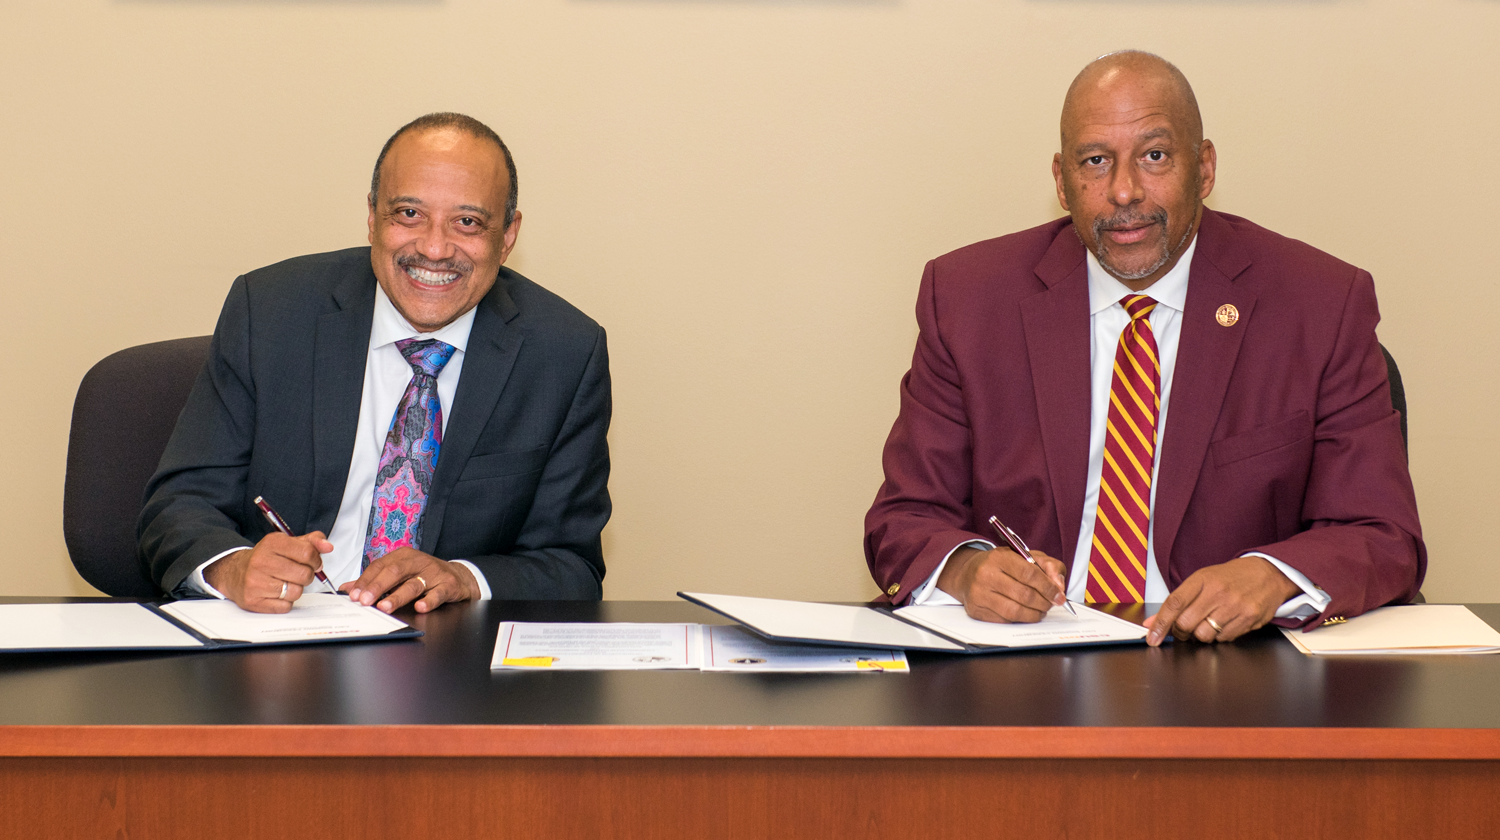 Left to Right: William F. Owen, dean and chancellor of RUSM, and Thomas A. Parham, president of CSUDH.